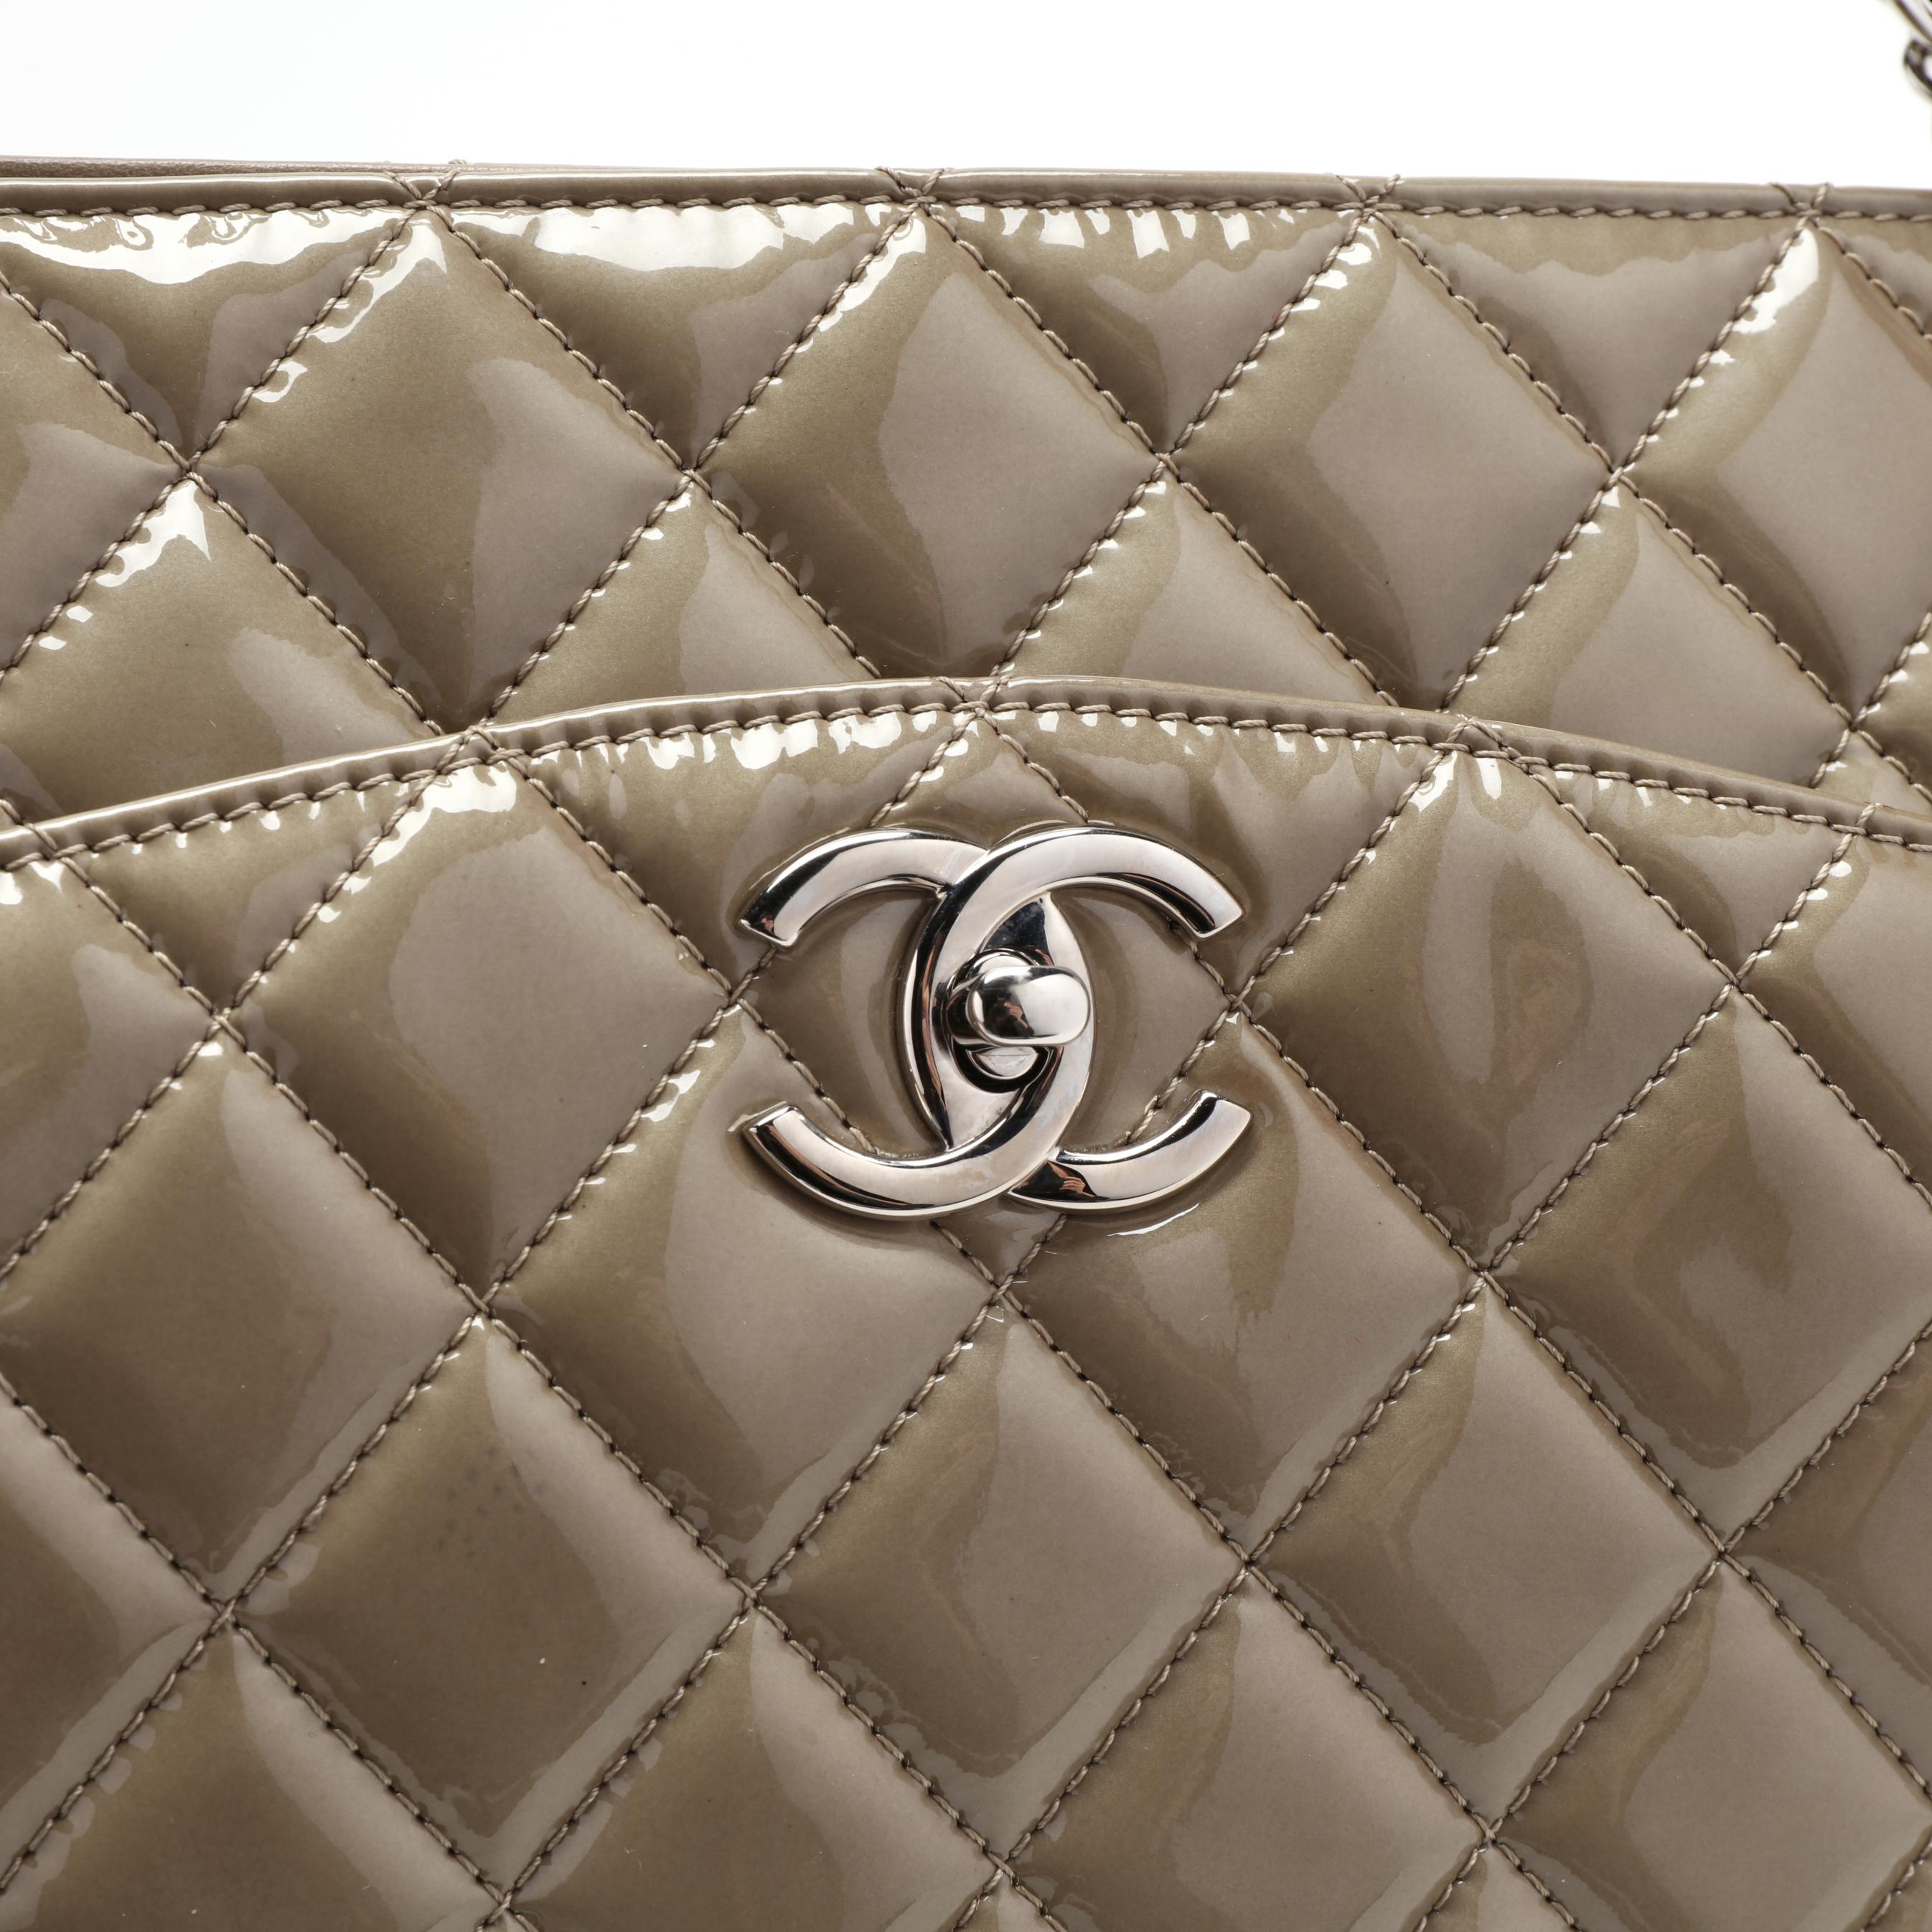 Chanel Grand Shopping Tote Bag Auction